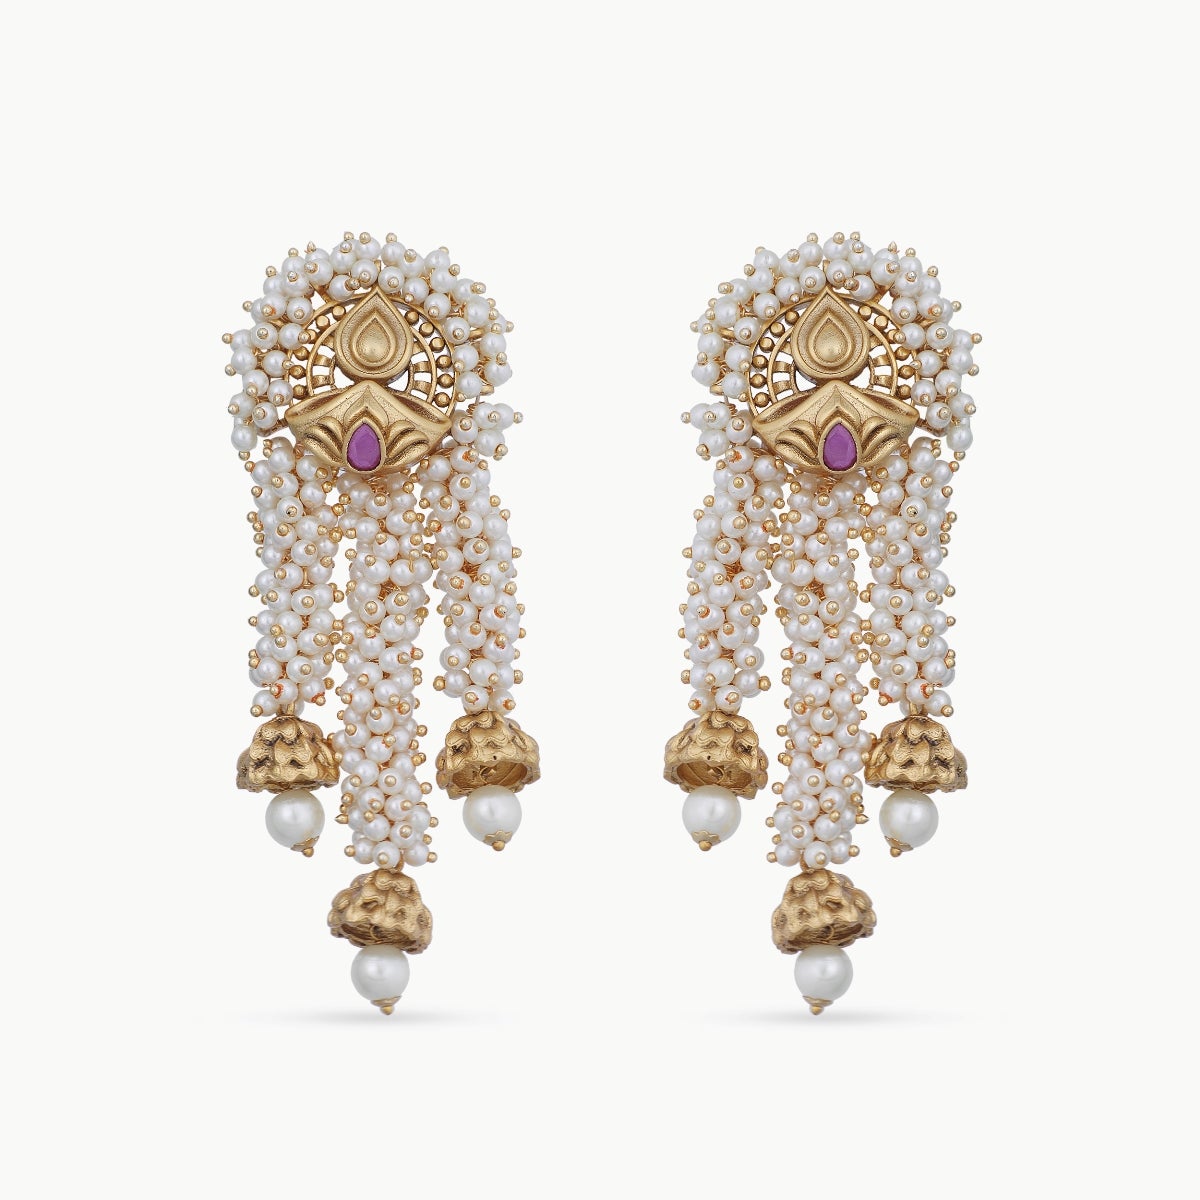 Aggregate more than 229 jewellery earrings online super hot